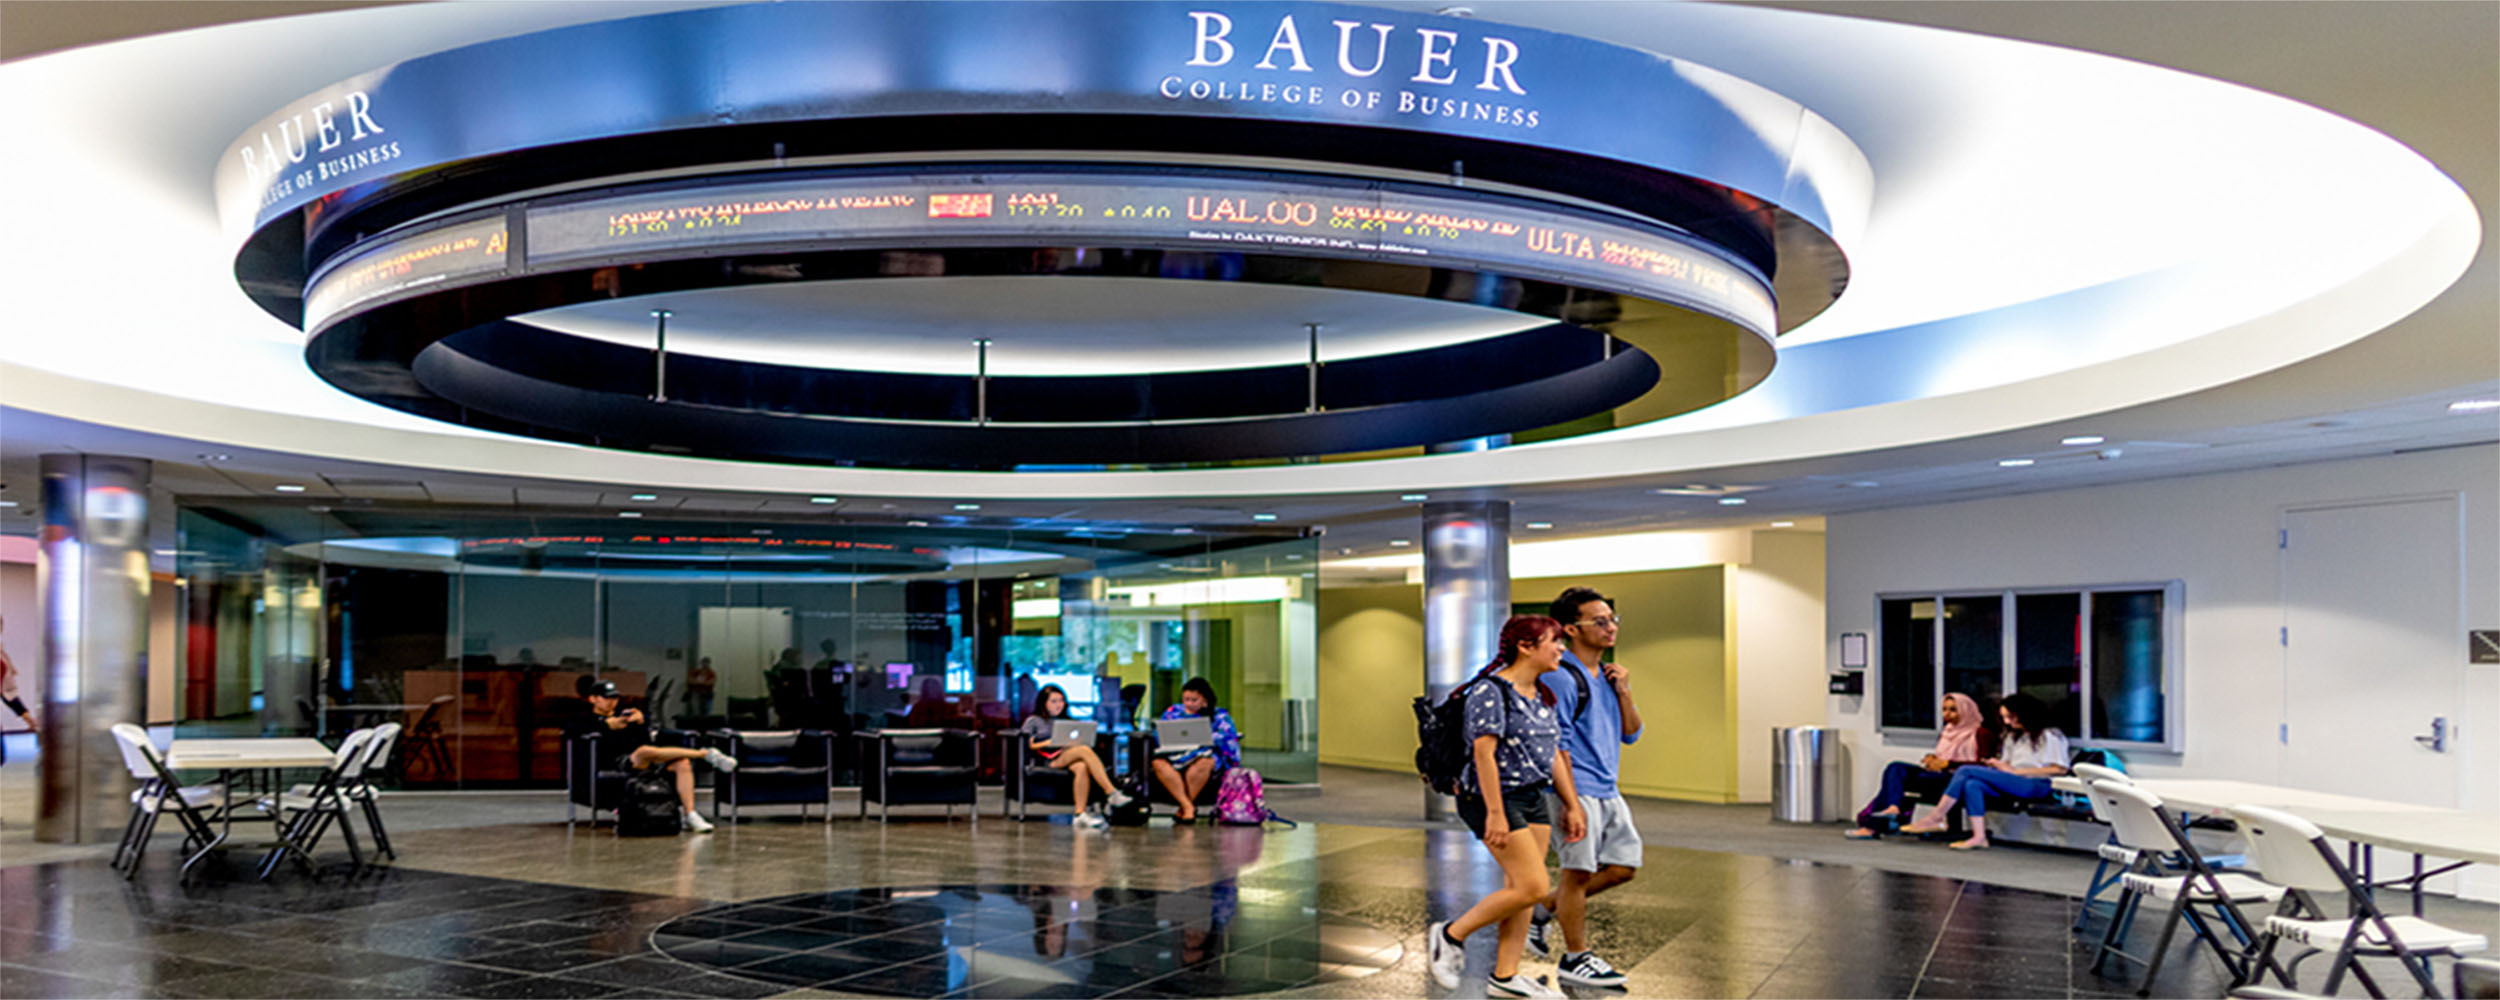 C.T. Bauer College of Business - UH Extend